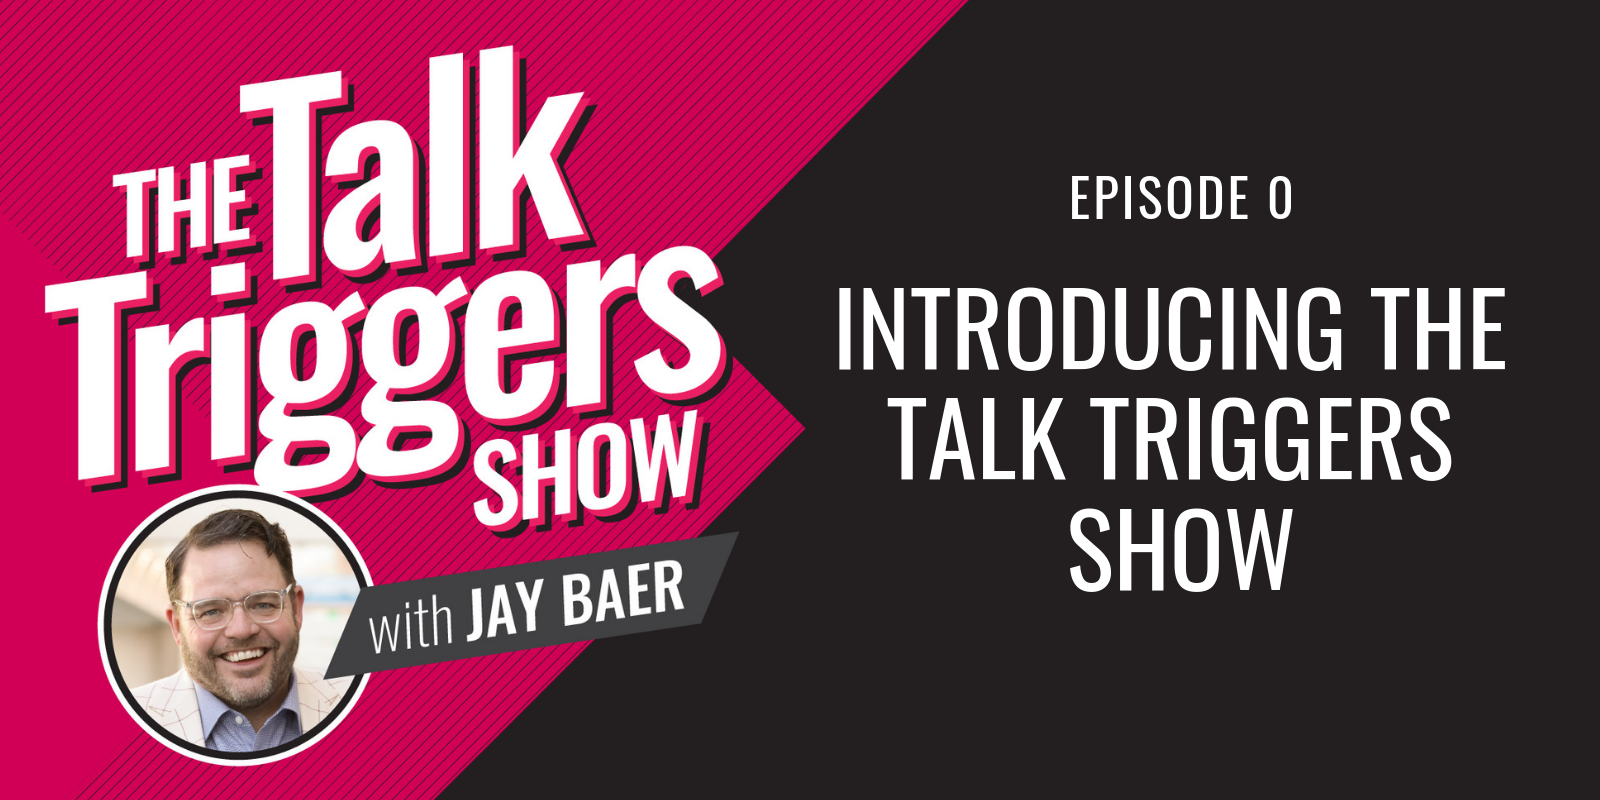 Introducing The Talk Triggers Show